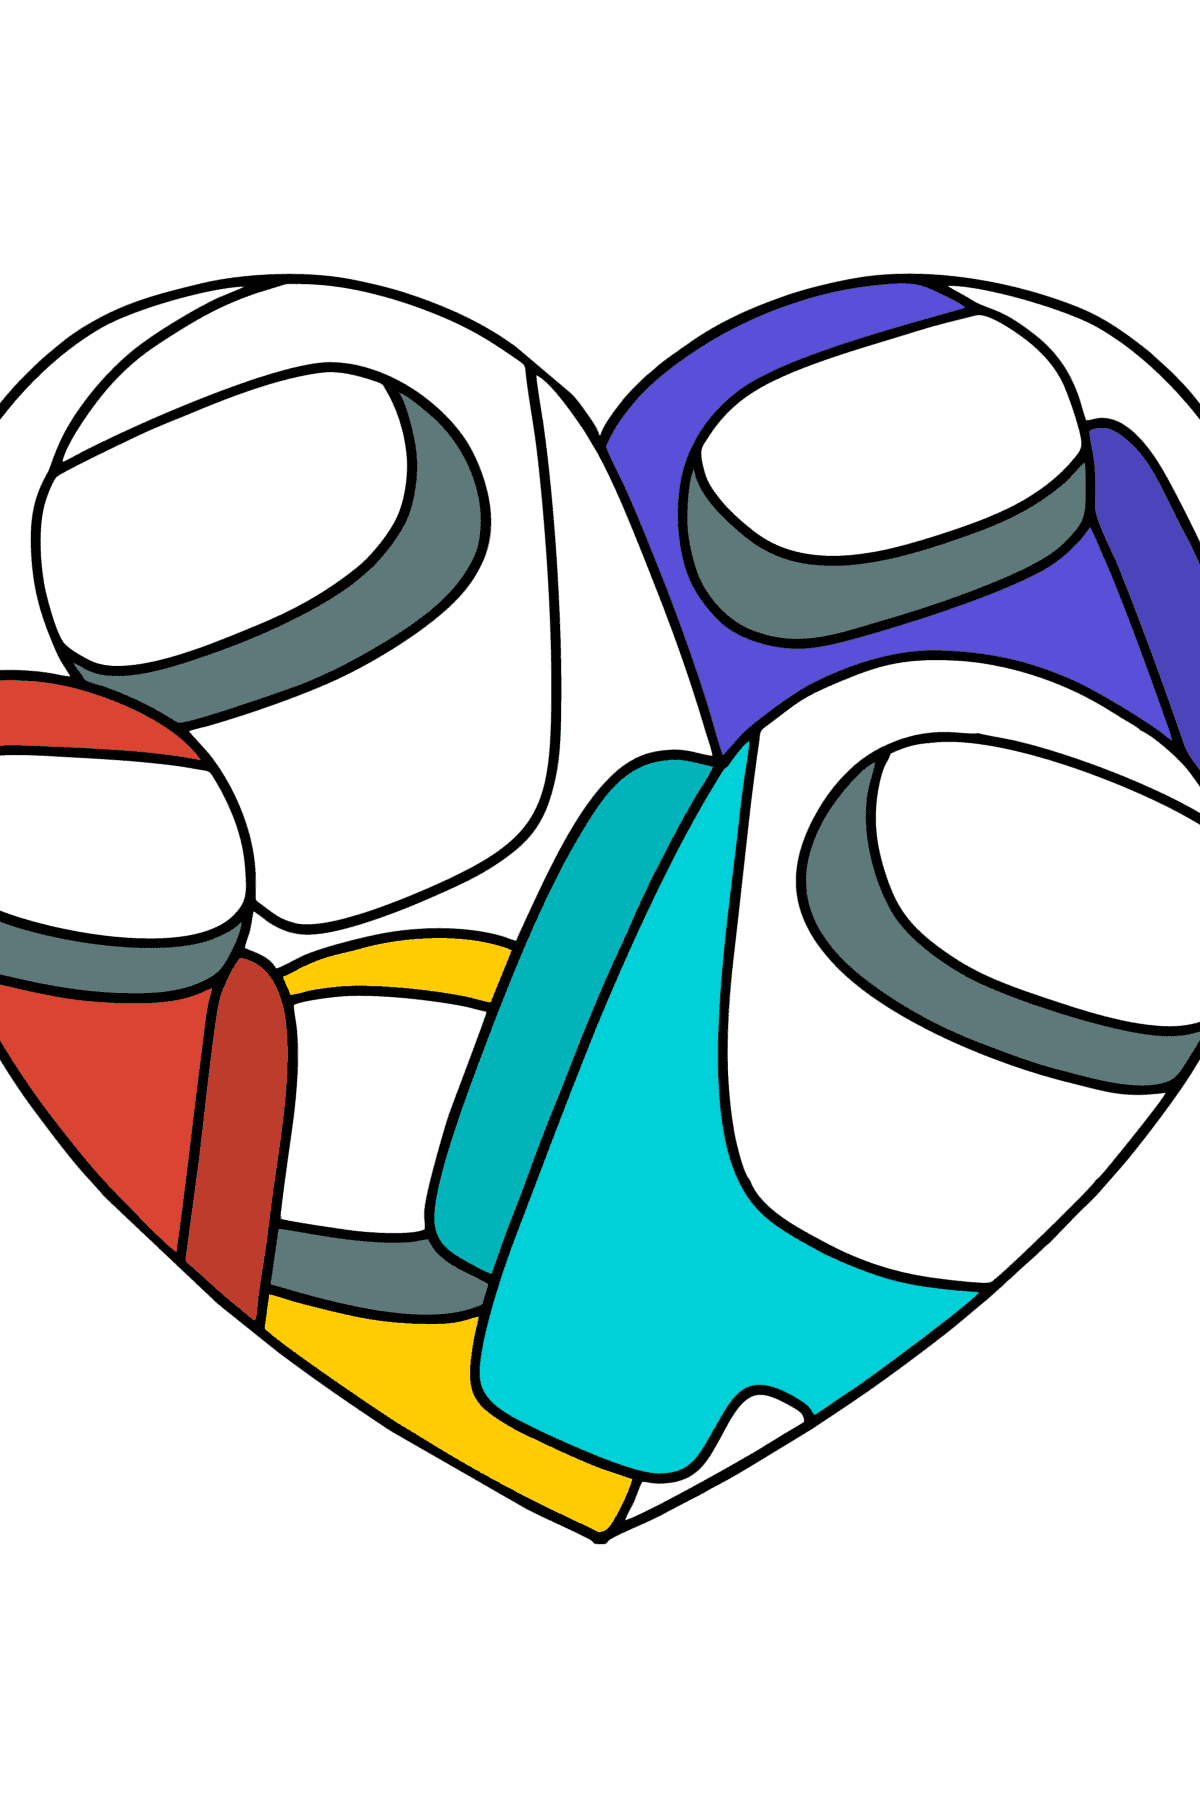 Coloring page heart with the heroes of Among As - Coloring Pages for Kids